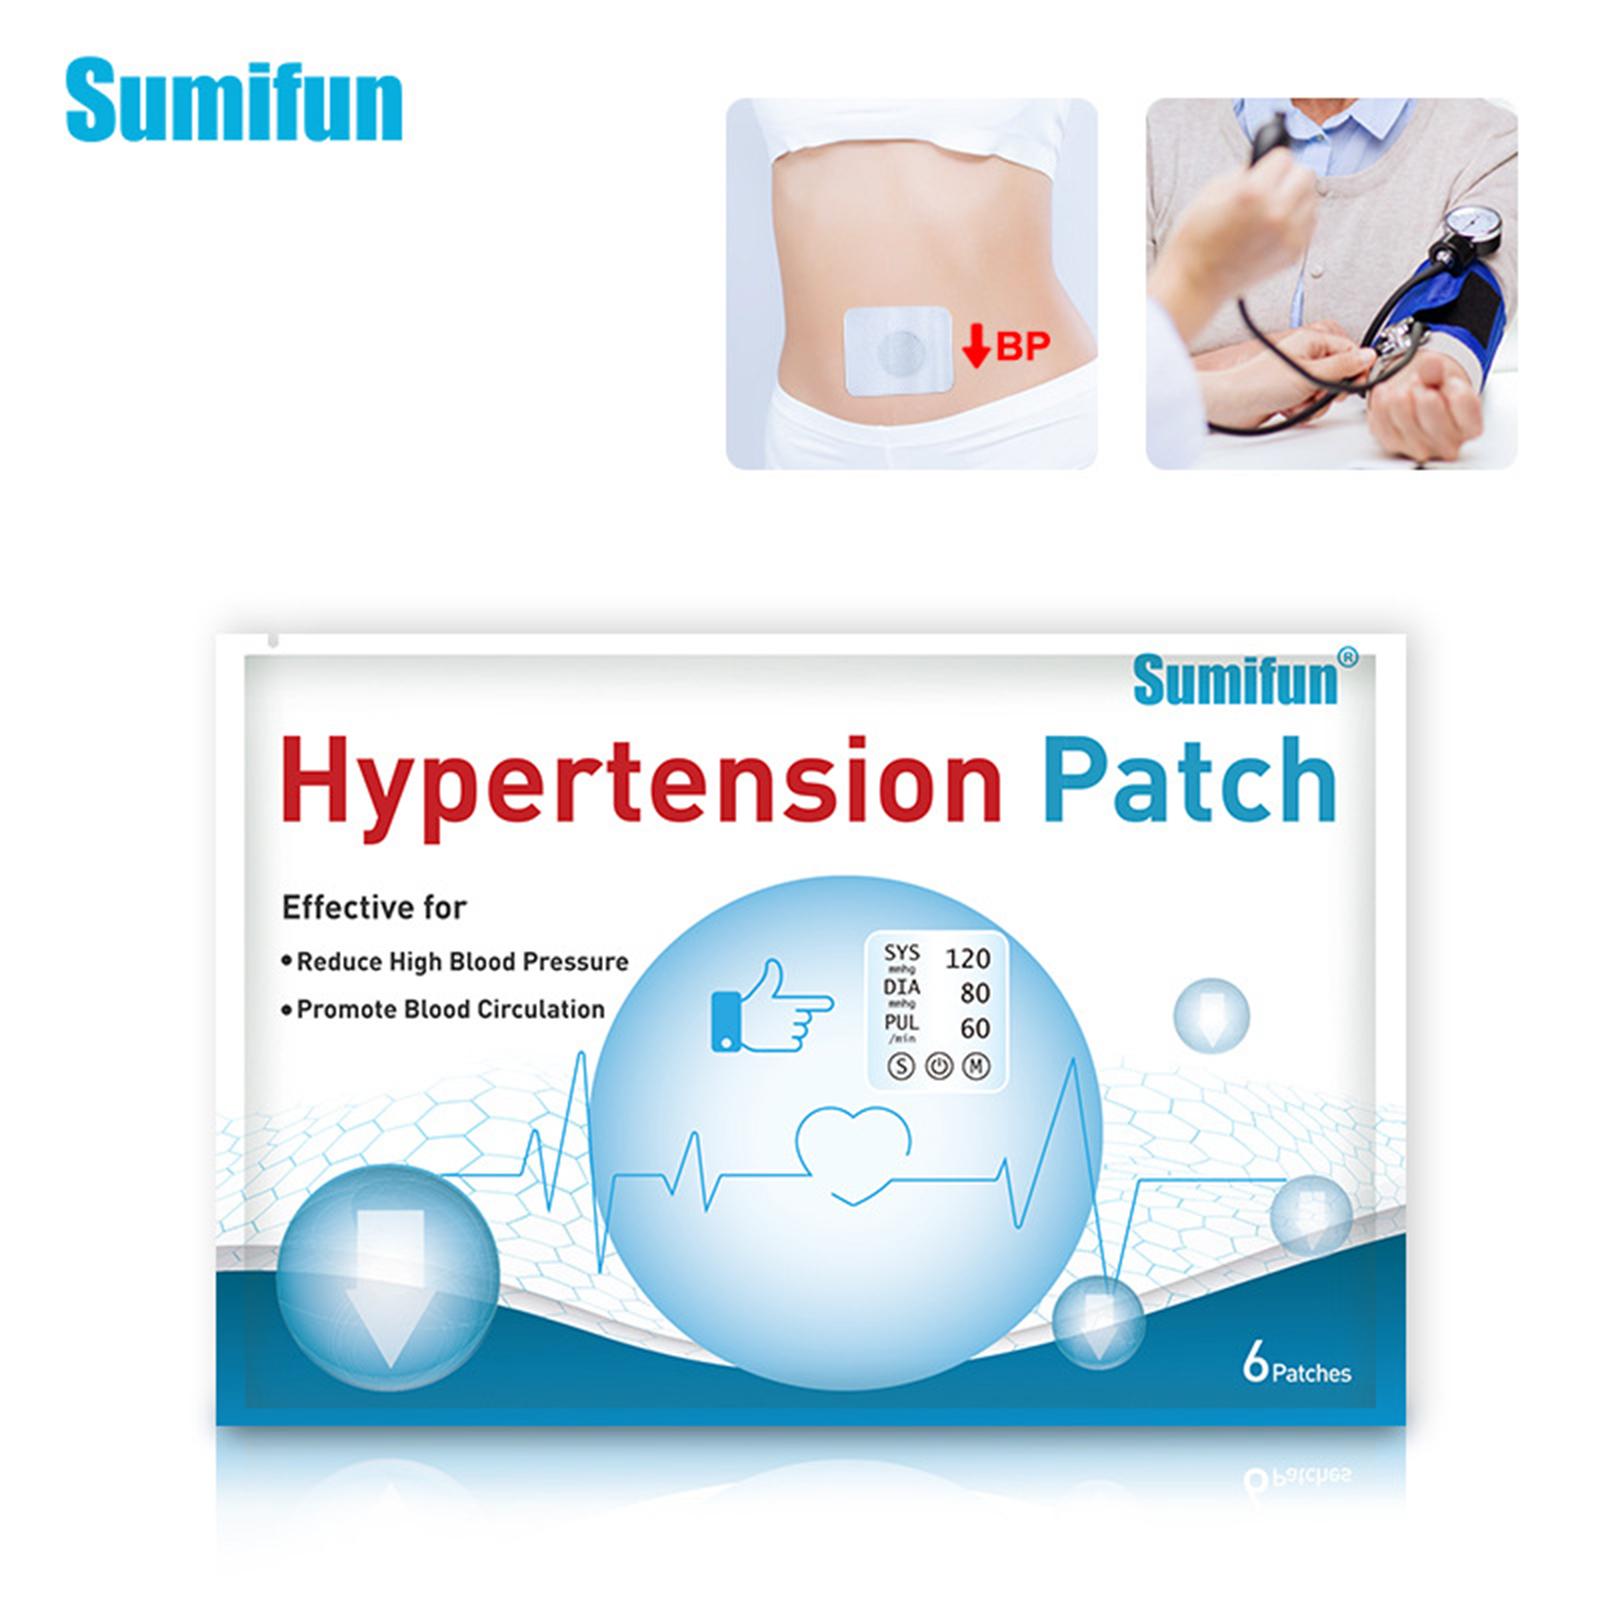 Sumifun 6 Patches Hypertension Patch Reduce High Blood Pressure Health Care Paste